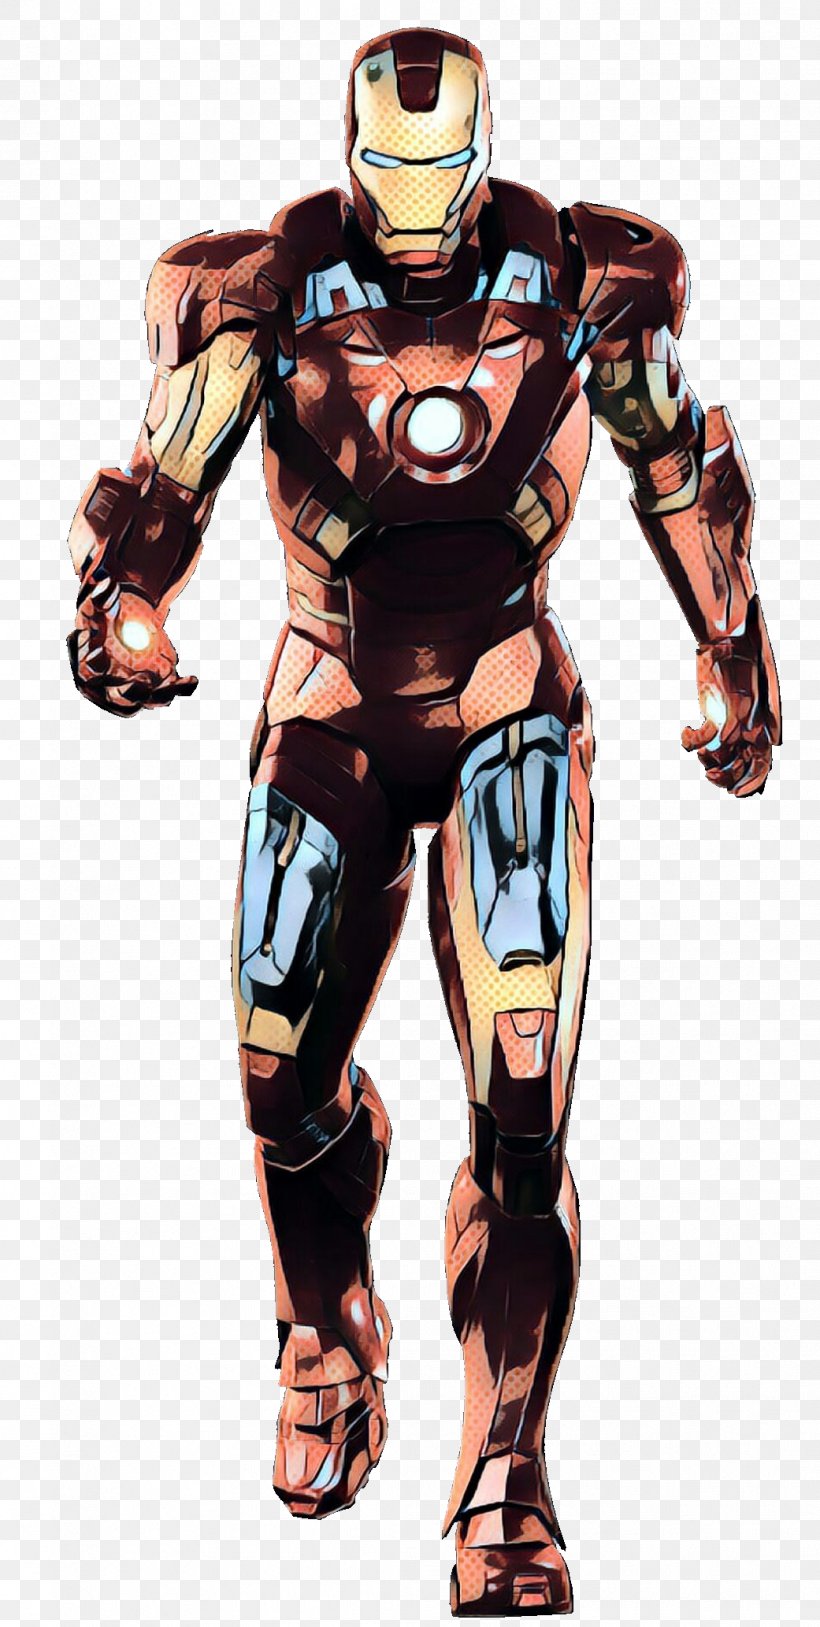 Iron Man's Armor Portable Network Graphics Marvel Cinematic Universe Image, PNG, 1041x2066px, Iron Man, Action Figure, Armour, Avengers, Drawing Download Free